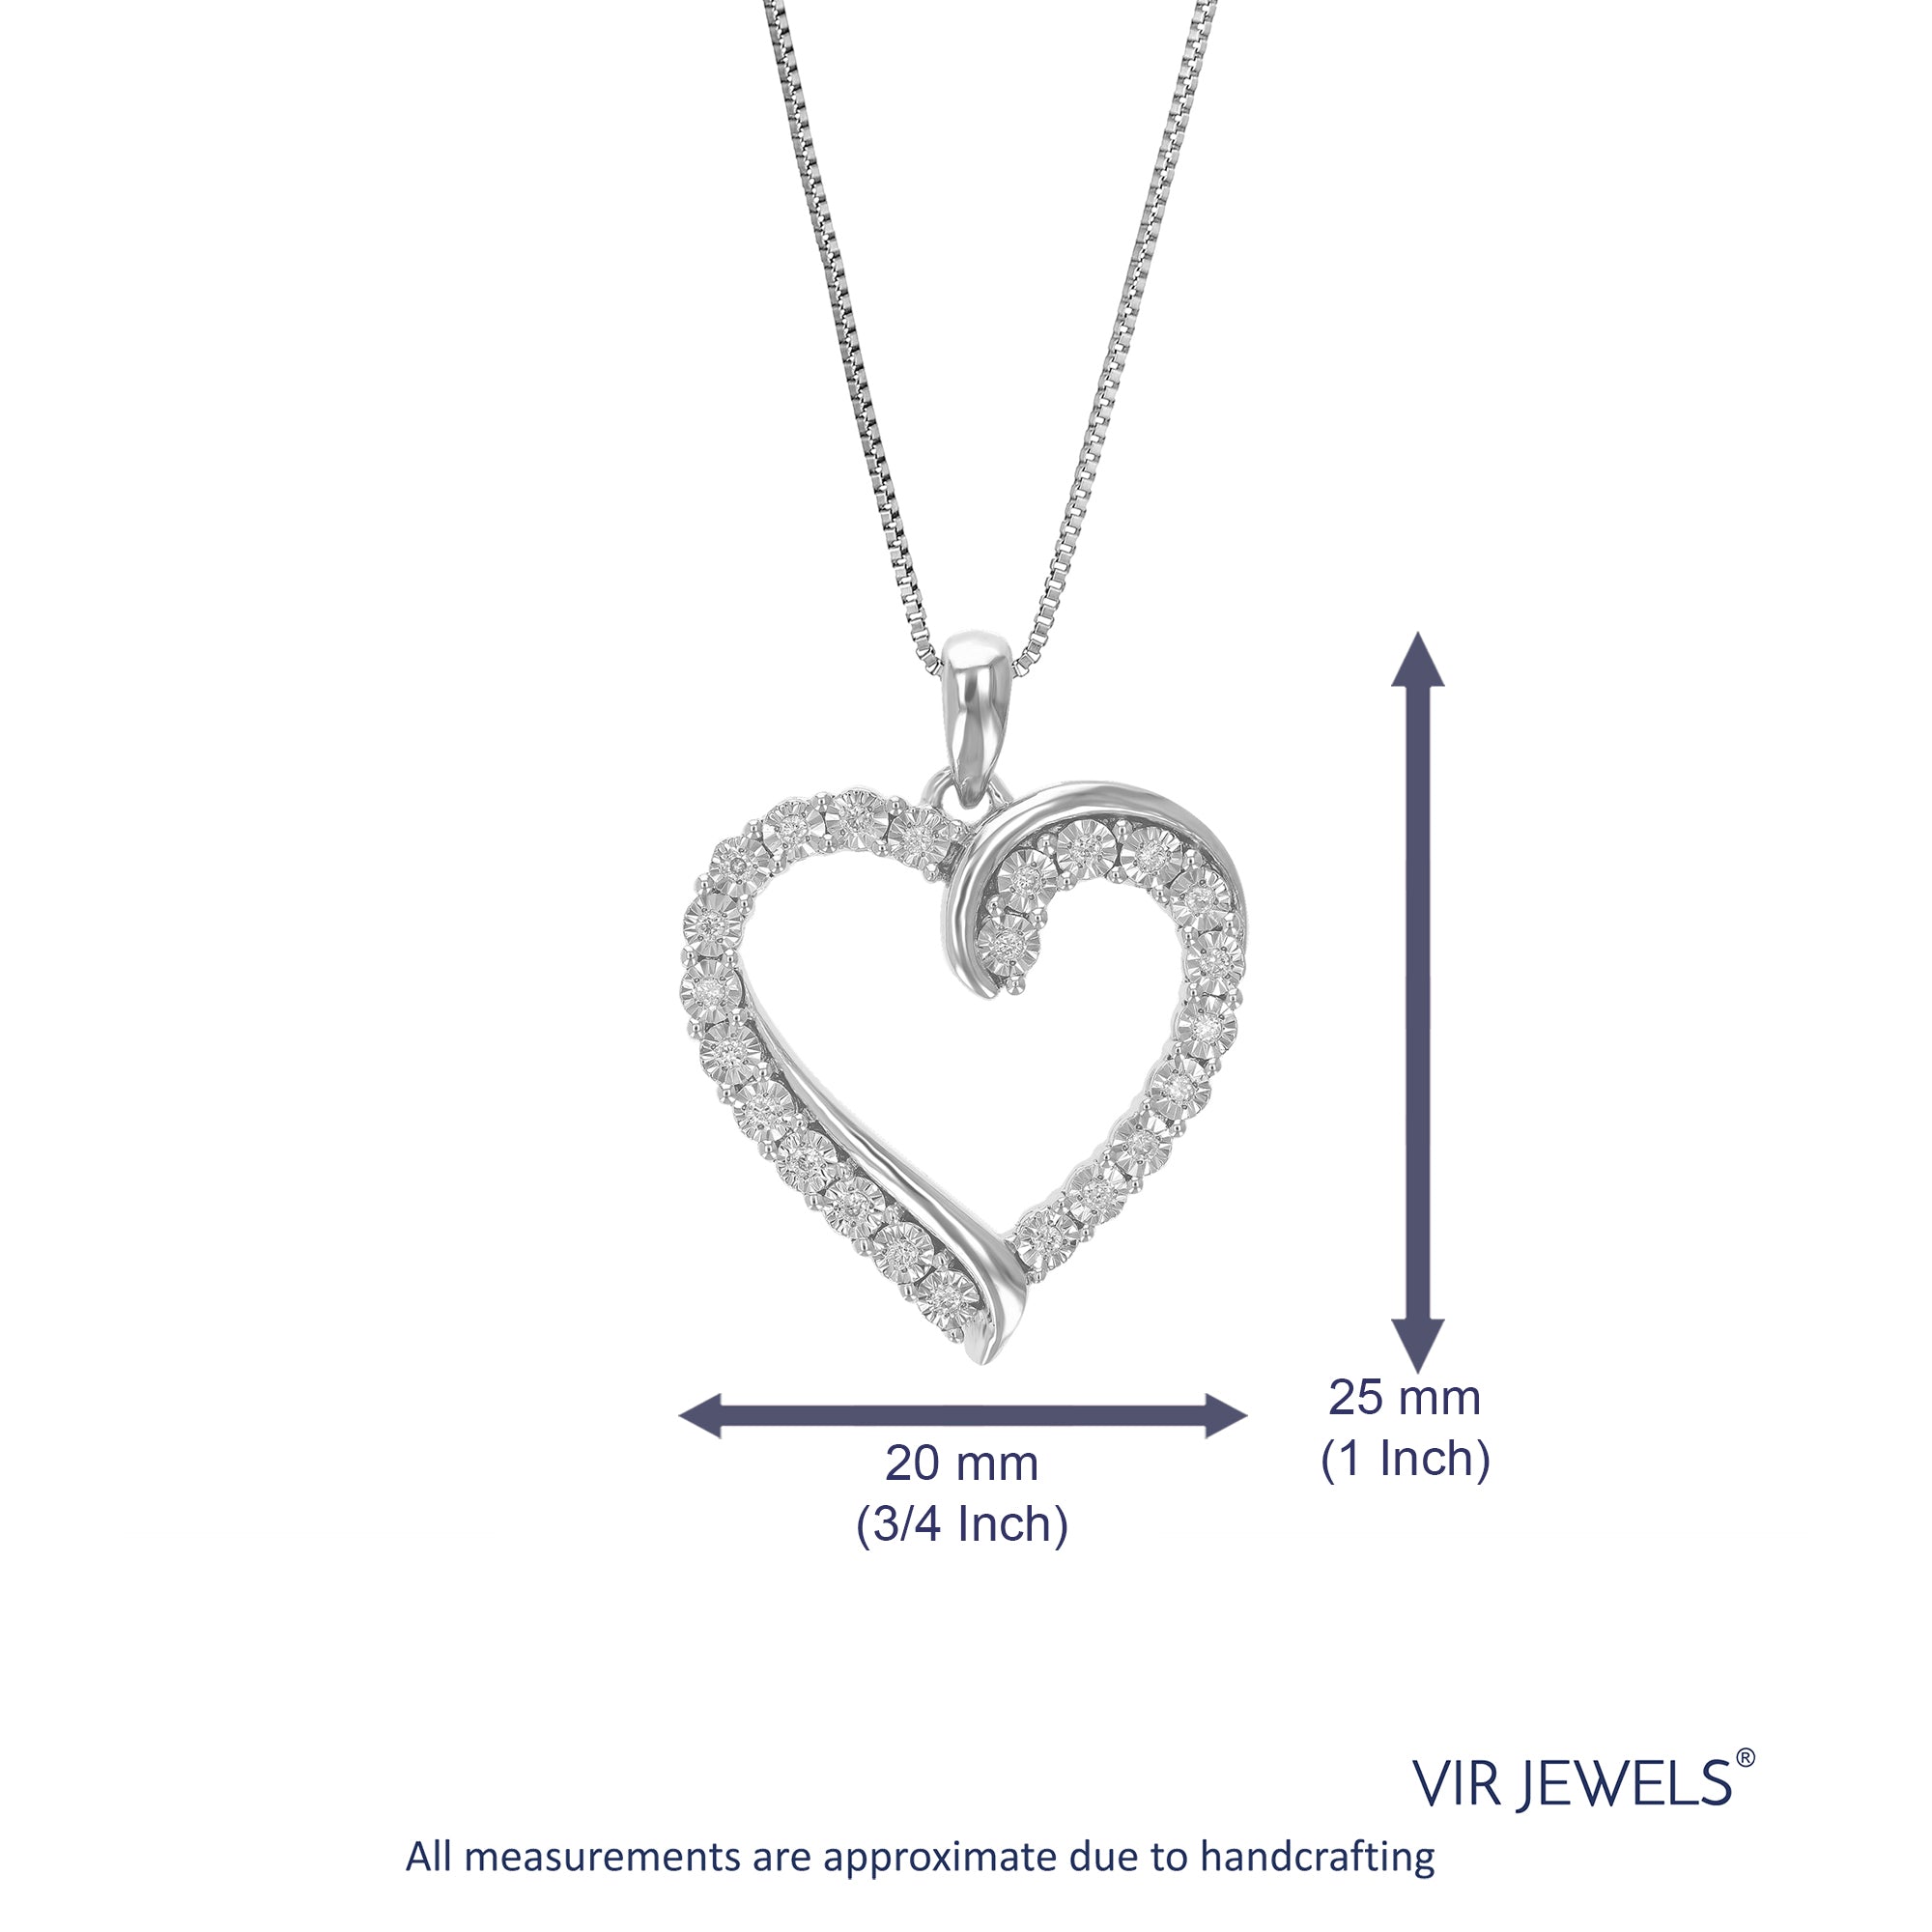 1/8 cttw Diamond Pendant Necklace for Women, Lab Grown Diamond Heart Pendant Necklace in .925 Sterling Silver with Chain, Size 1 Inch